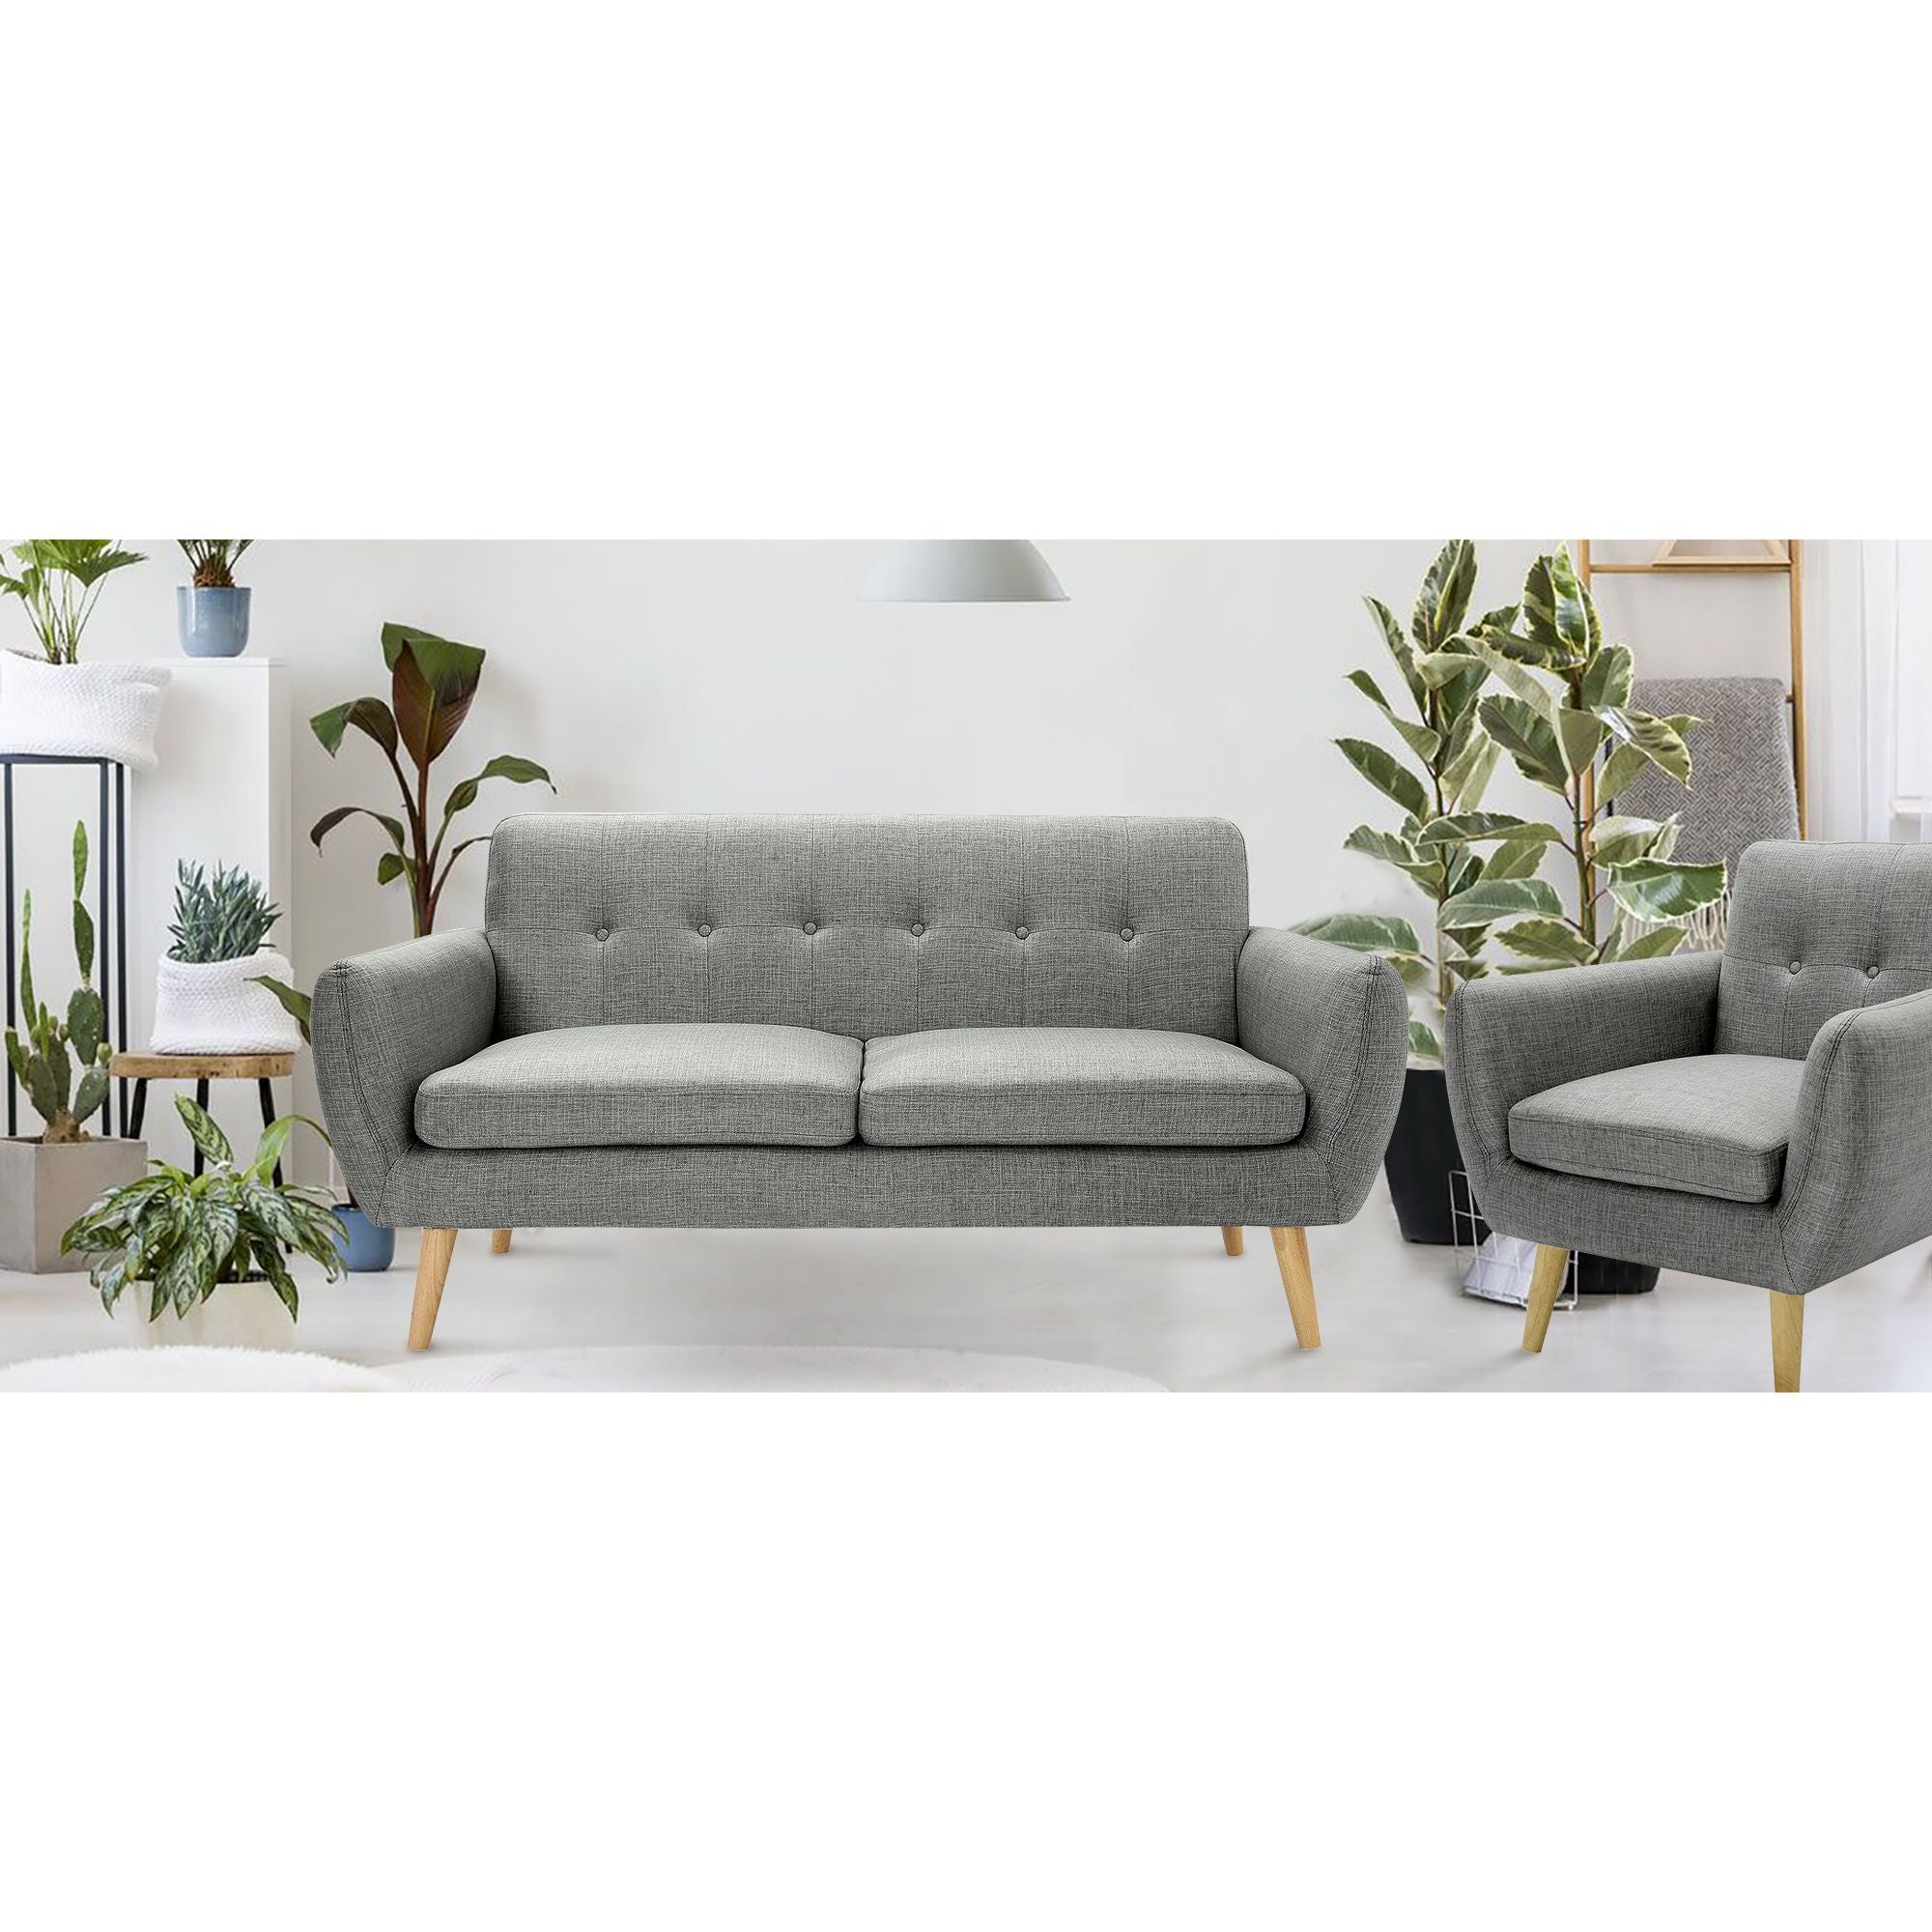 Dane 3 + 1 + 1 Seater Fabric Upholstered Sofa Armchair Lounge Couch - Mid Grey